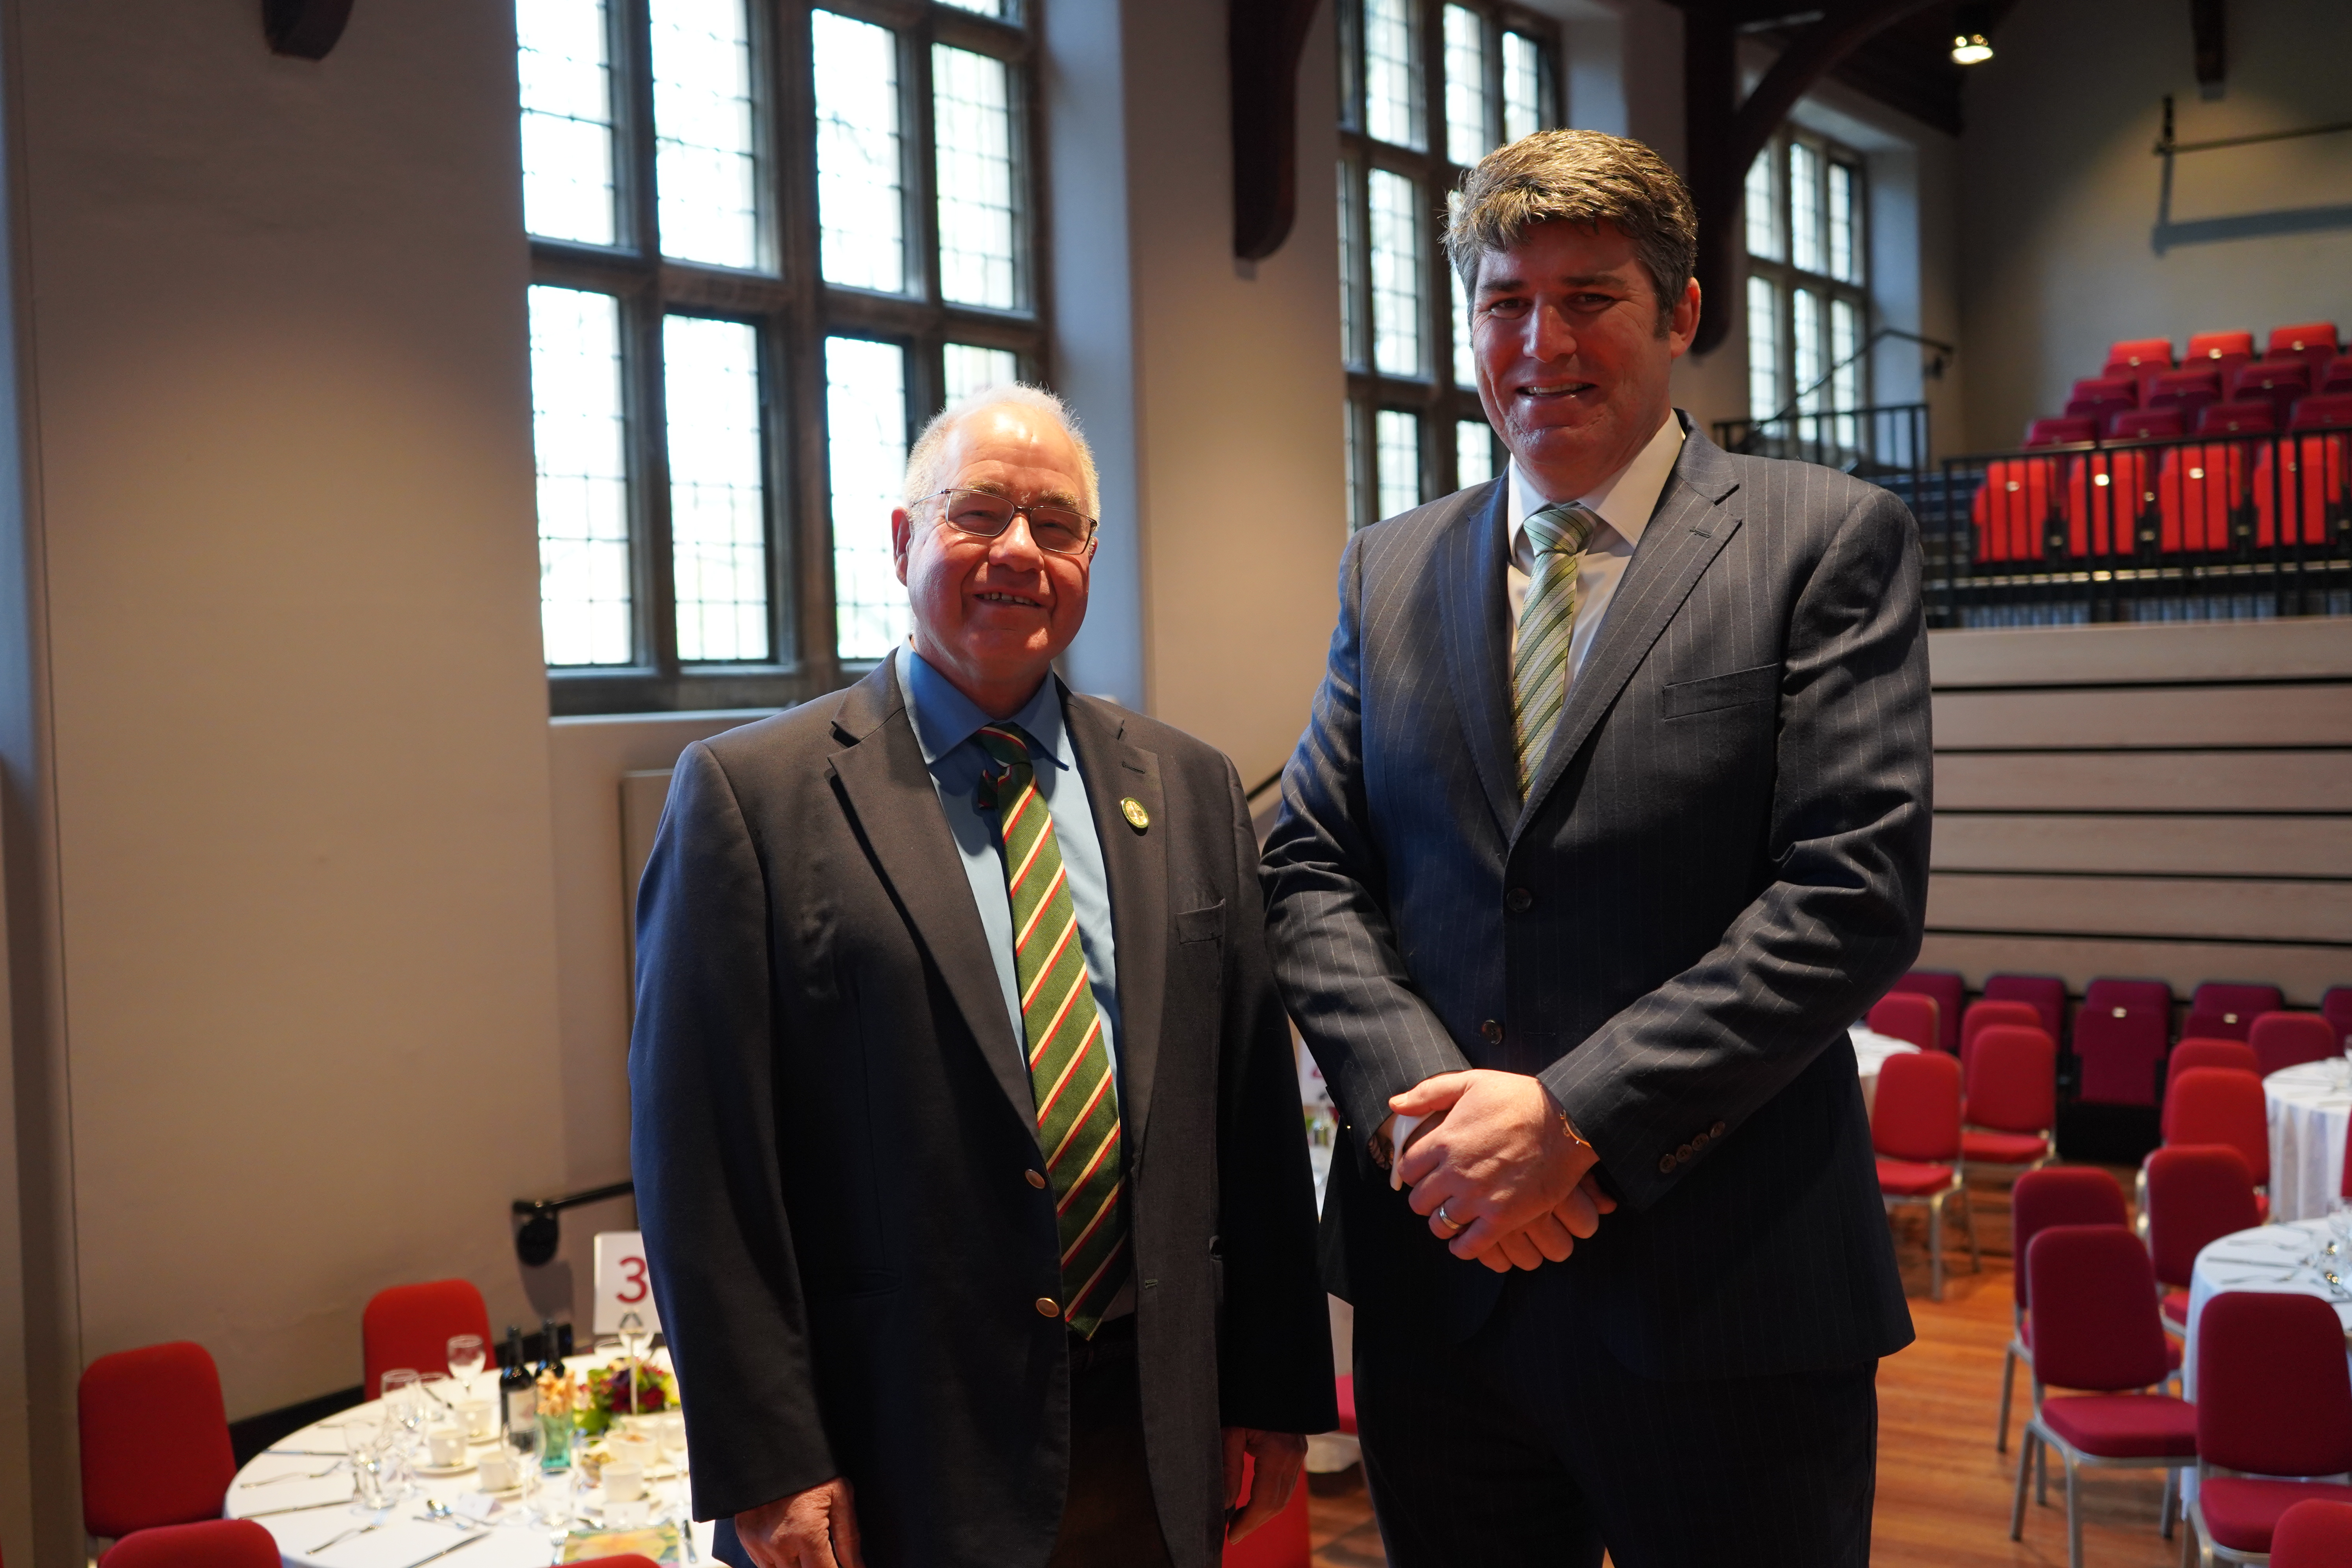 The Inaugural Speaker's Lunch with OB John Massey - 30/11/2019: John Massey and Peter Clague